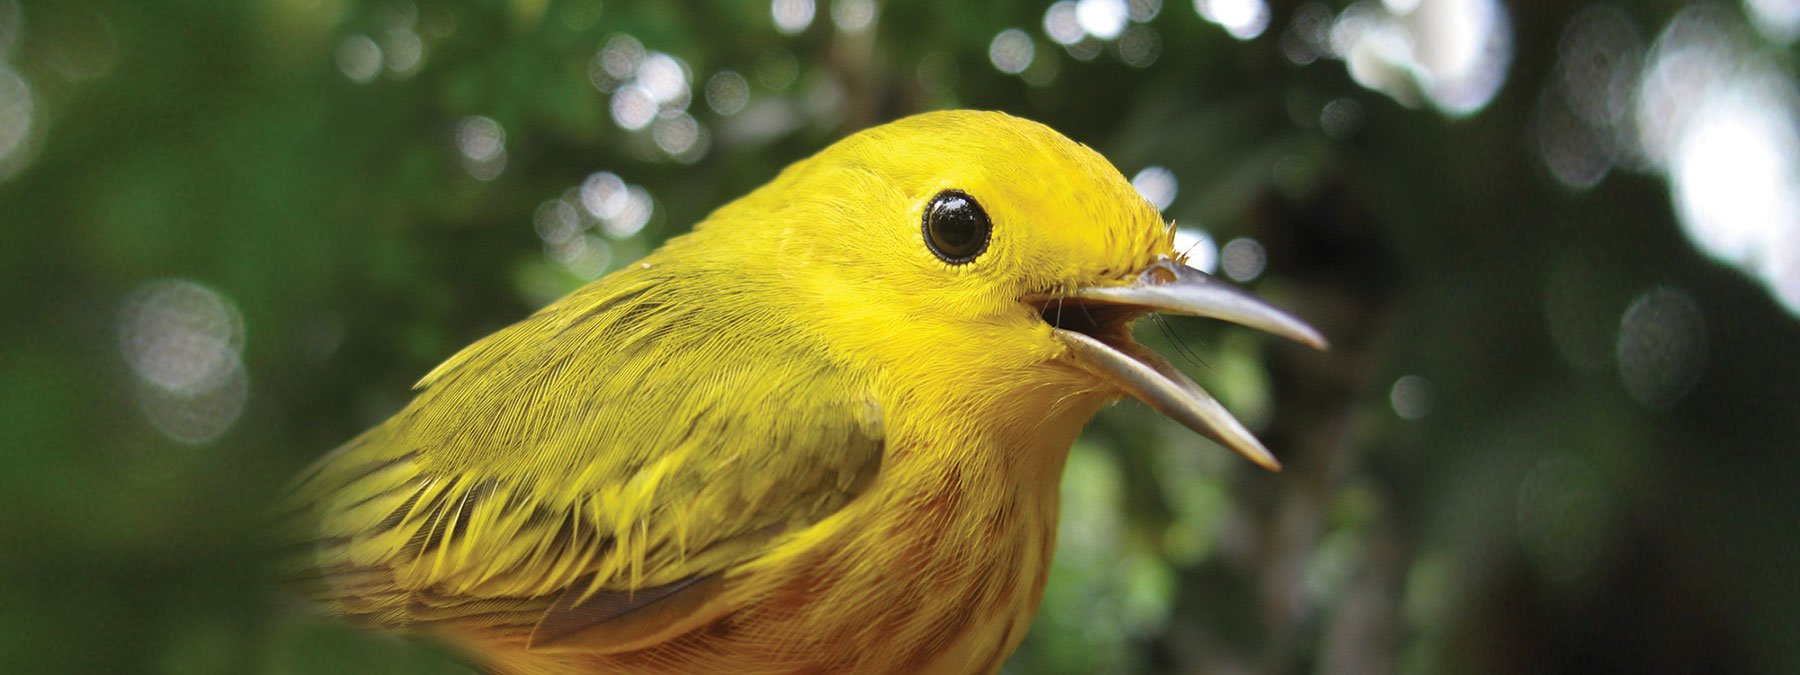 A photo of a yellow warbler